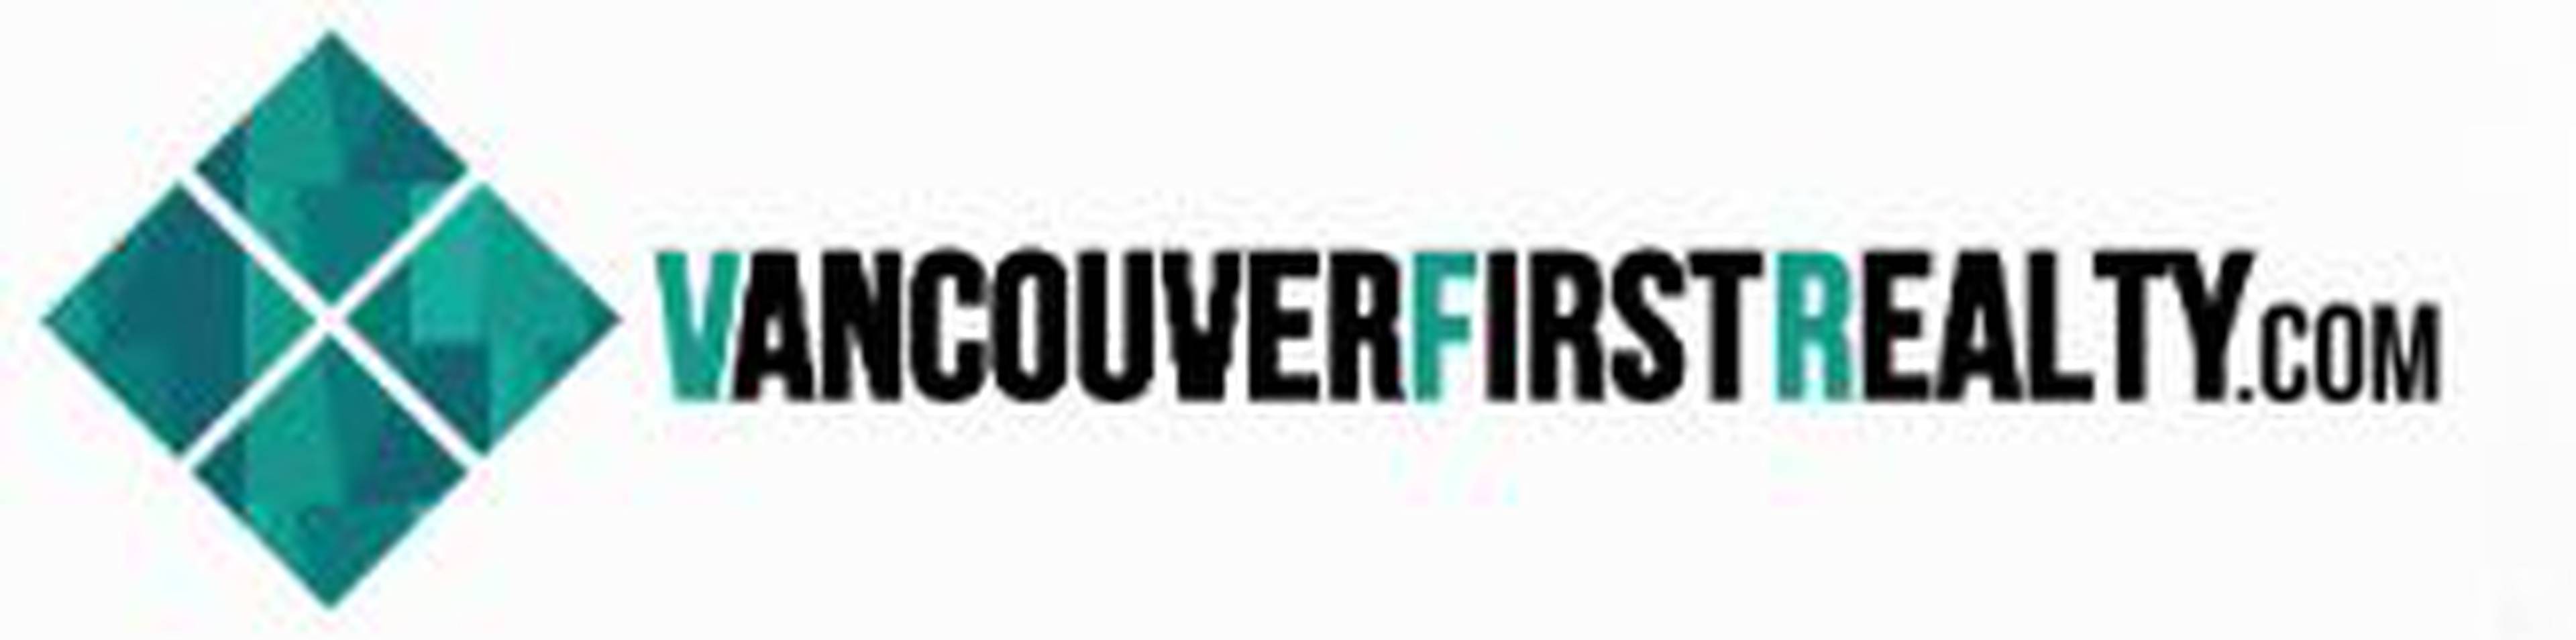 Sutton Group Vancouver First Realty Logo